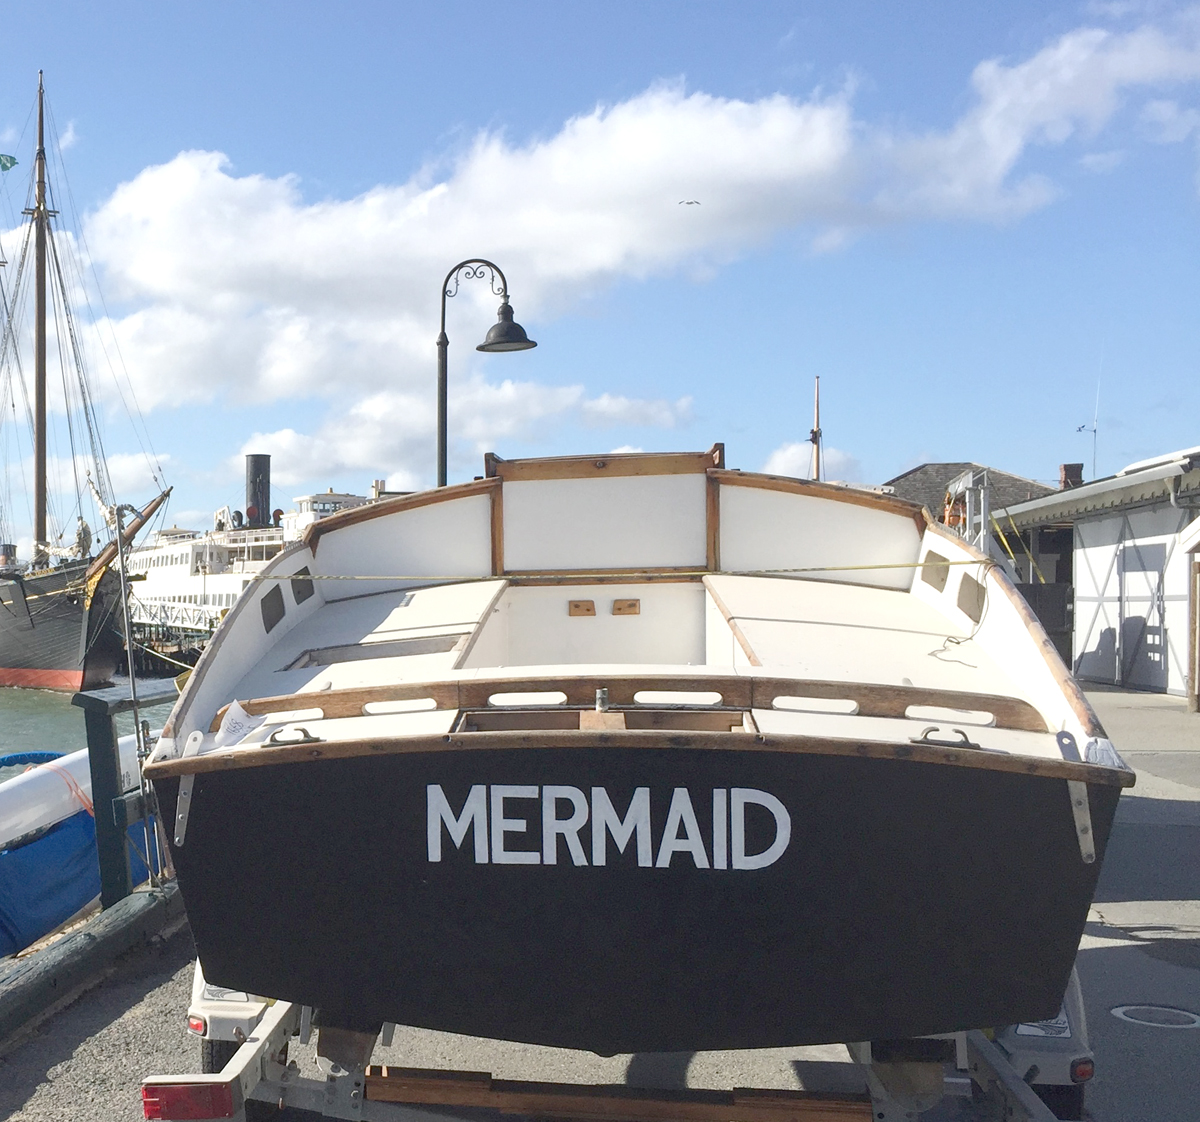 Small boat Mermaid sitting on a trailer at Hyde Street Pier. Viewed from the stern with the name "Mermaid" visible.